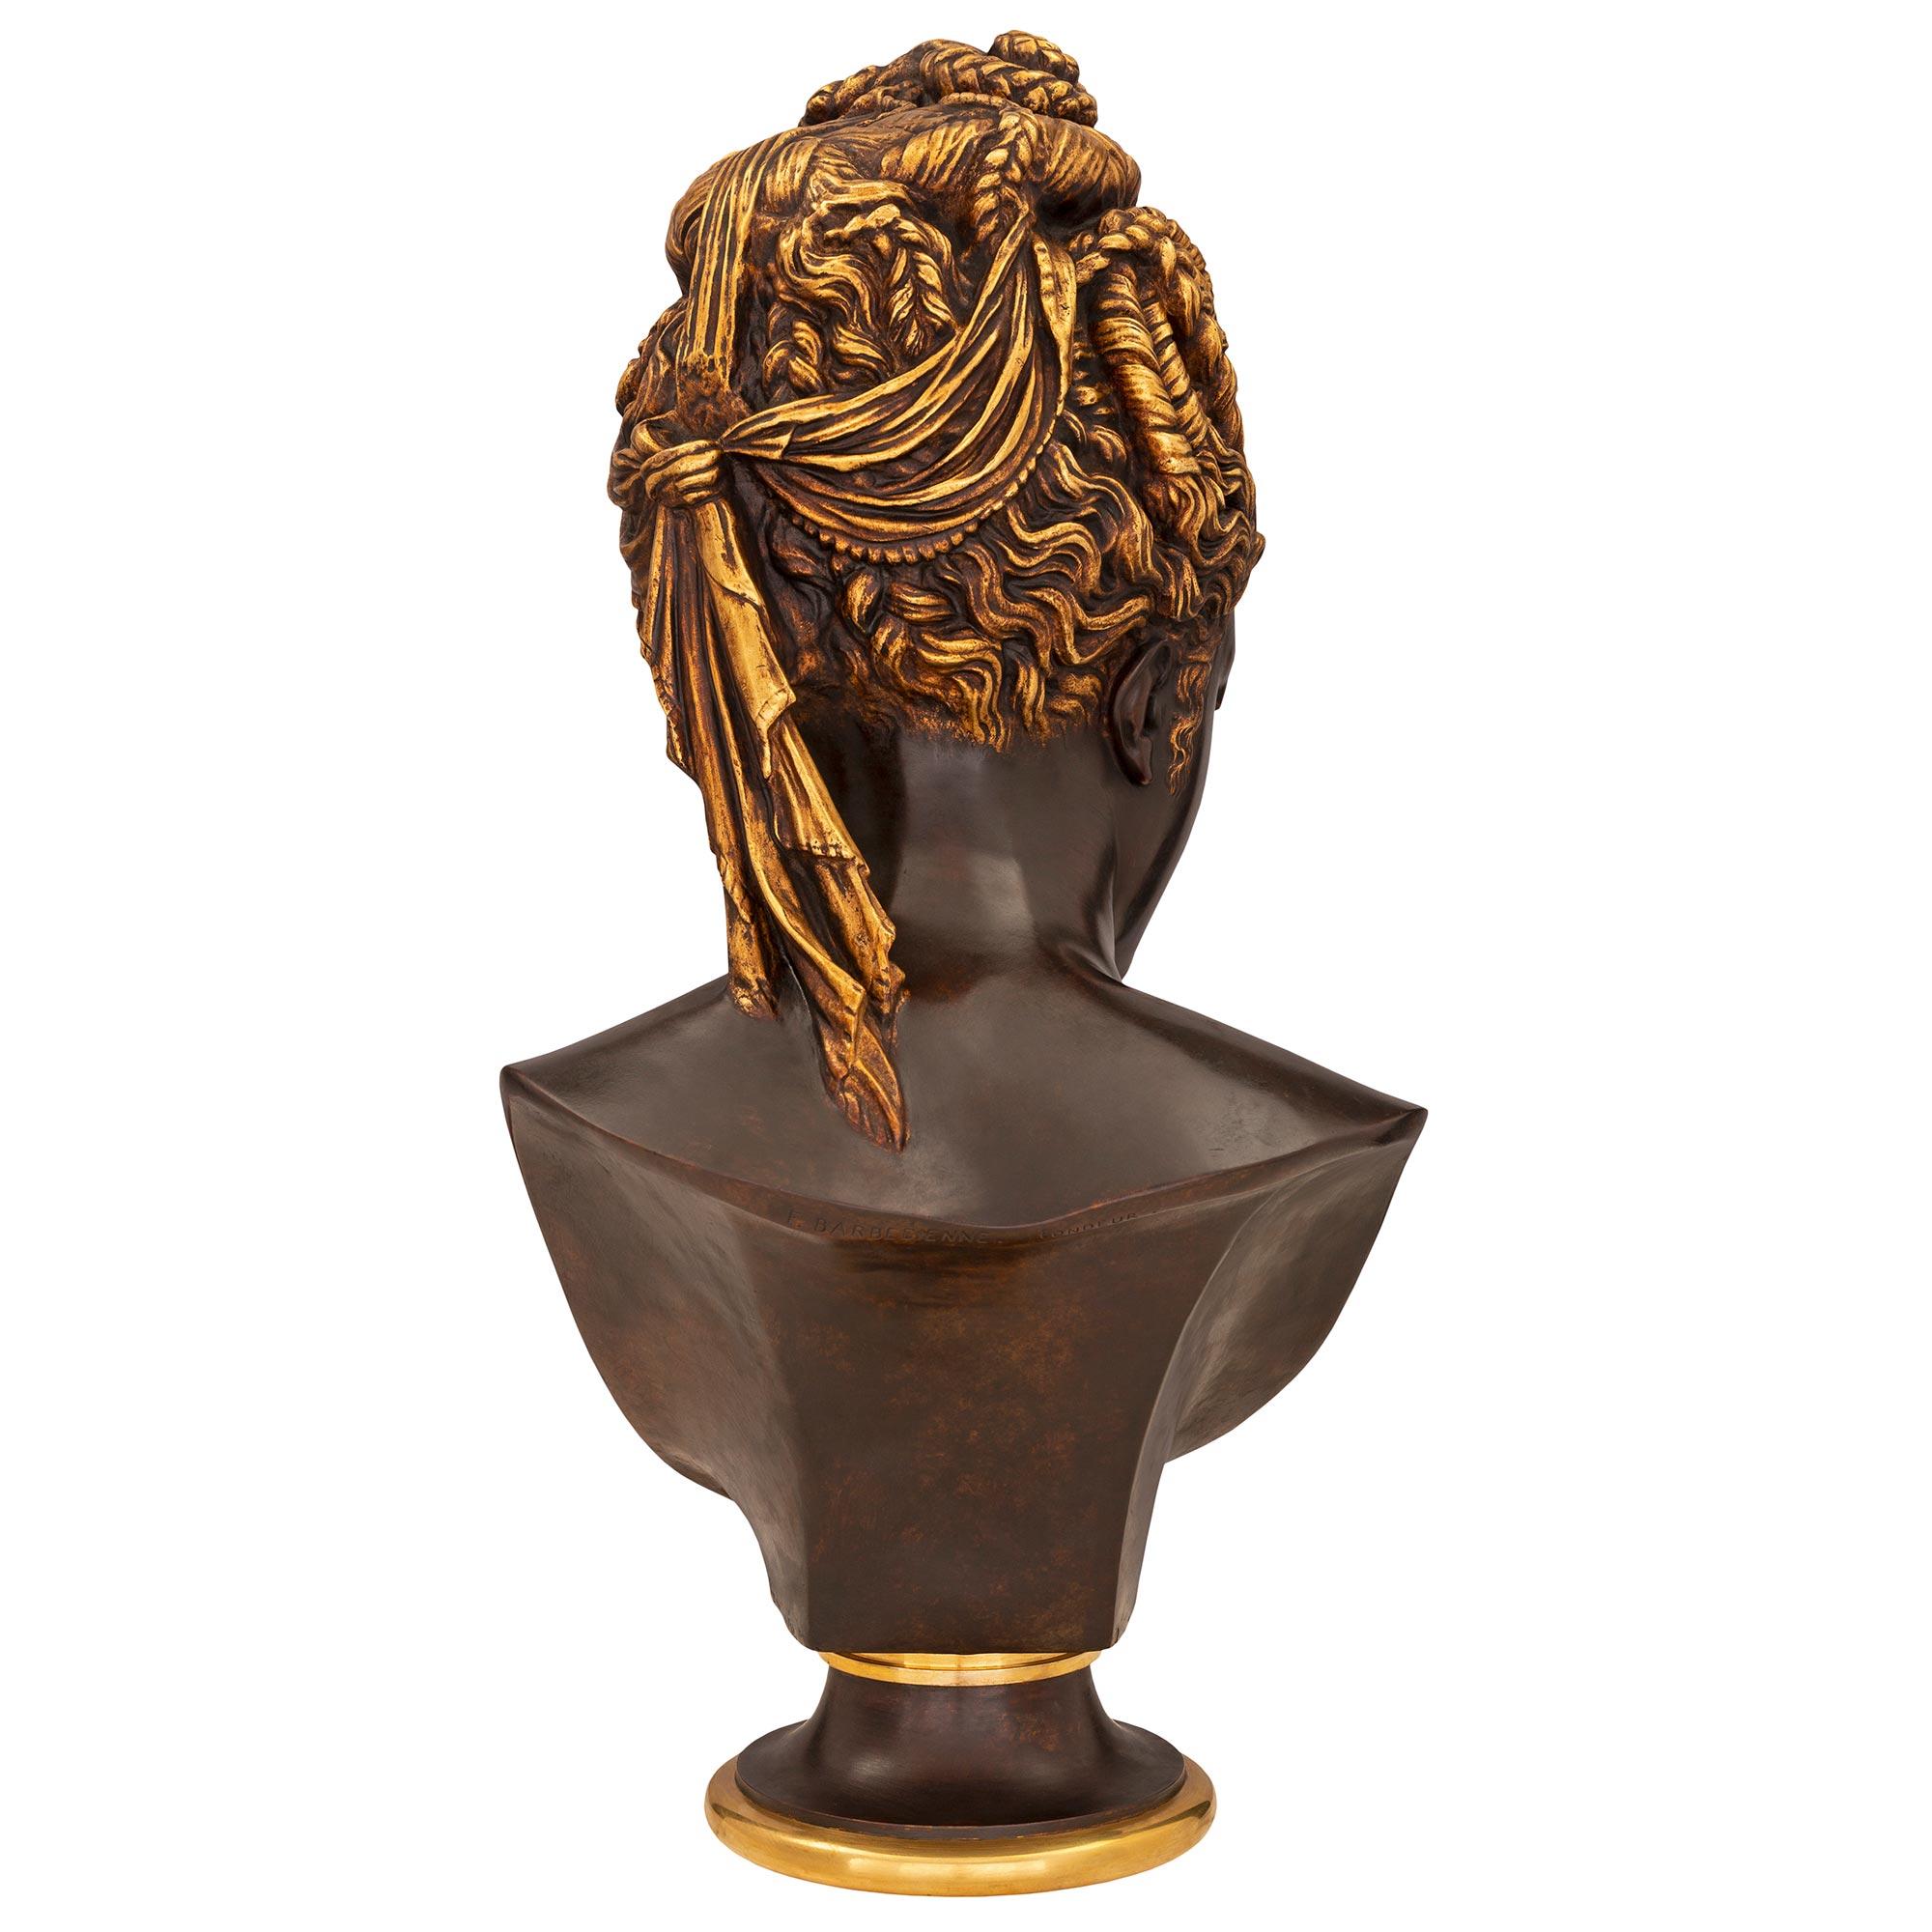 French 19th Century Egyptian Revival St. Bronze and Ormolu Bust In Good Condition For Sale In West Palm Beach, FL